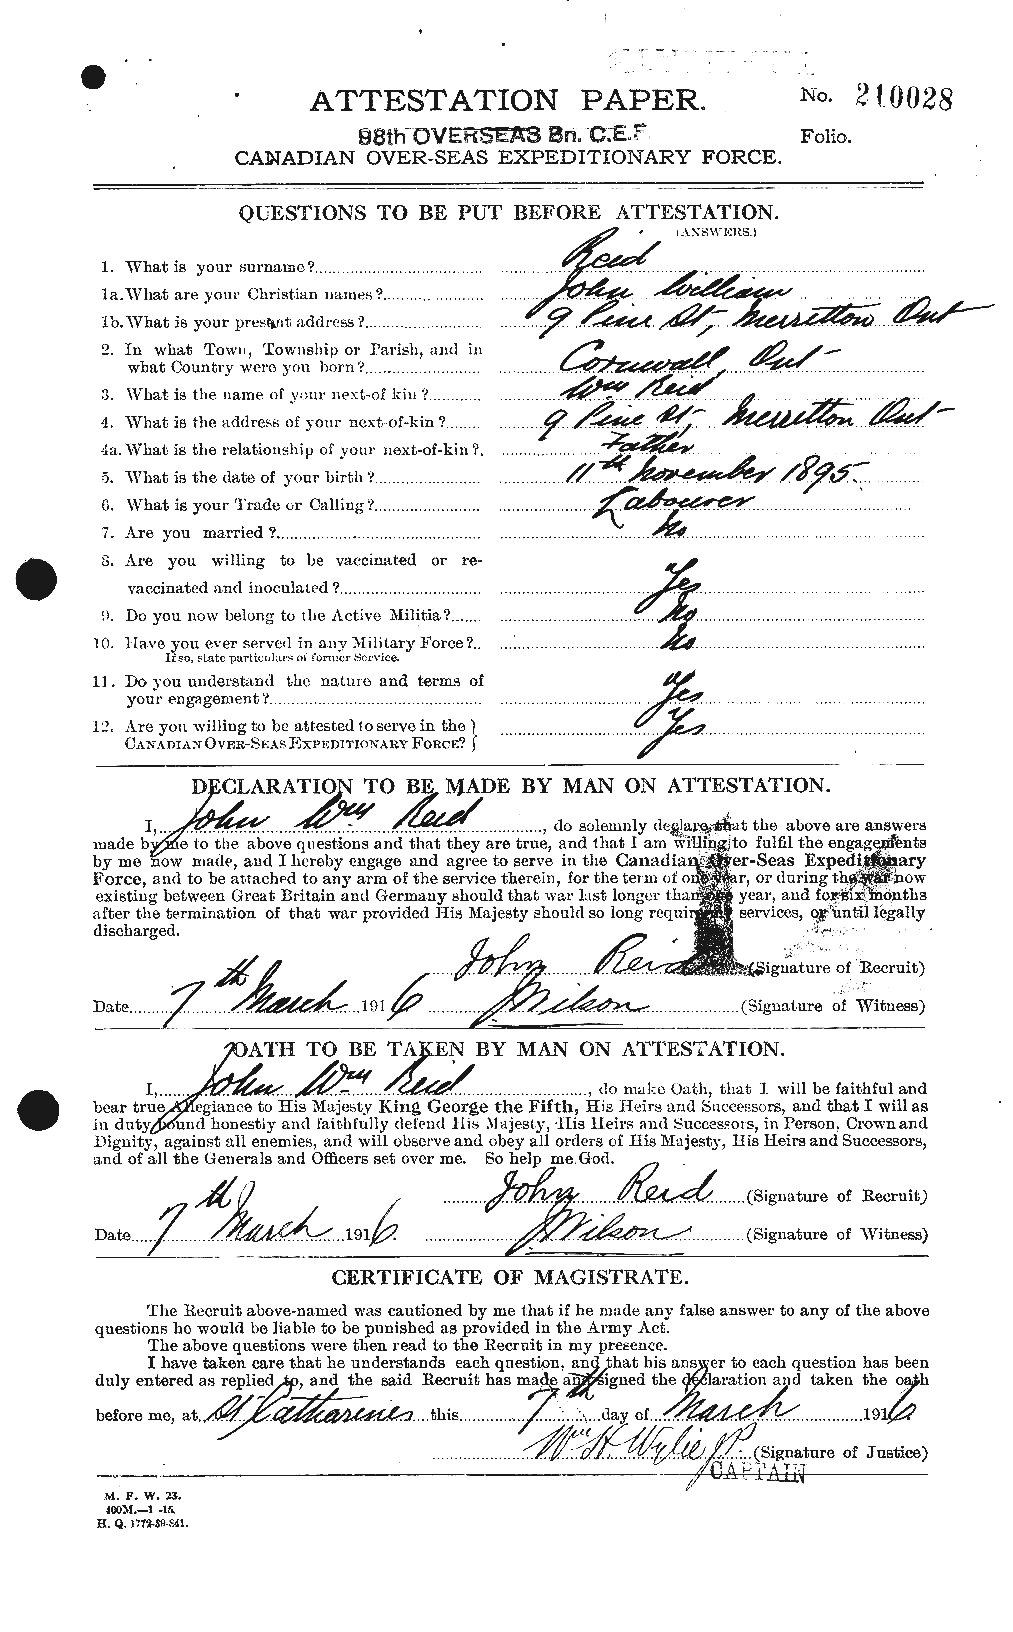 Personnel Records of the First World War - CEF 598882a